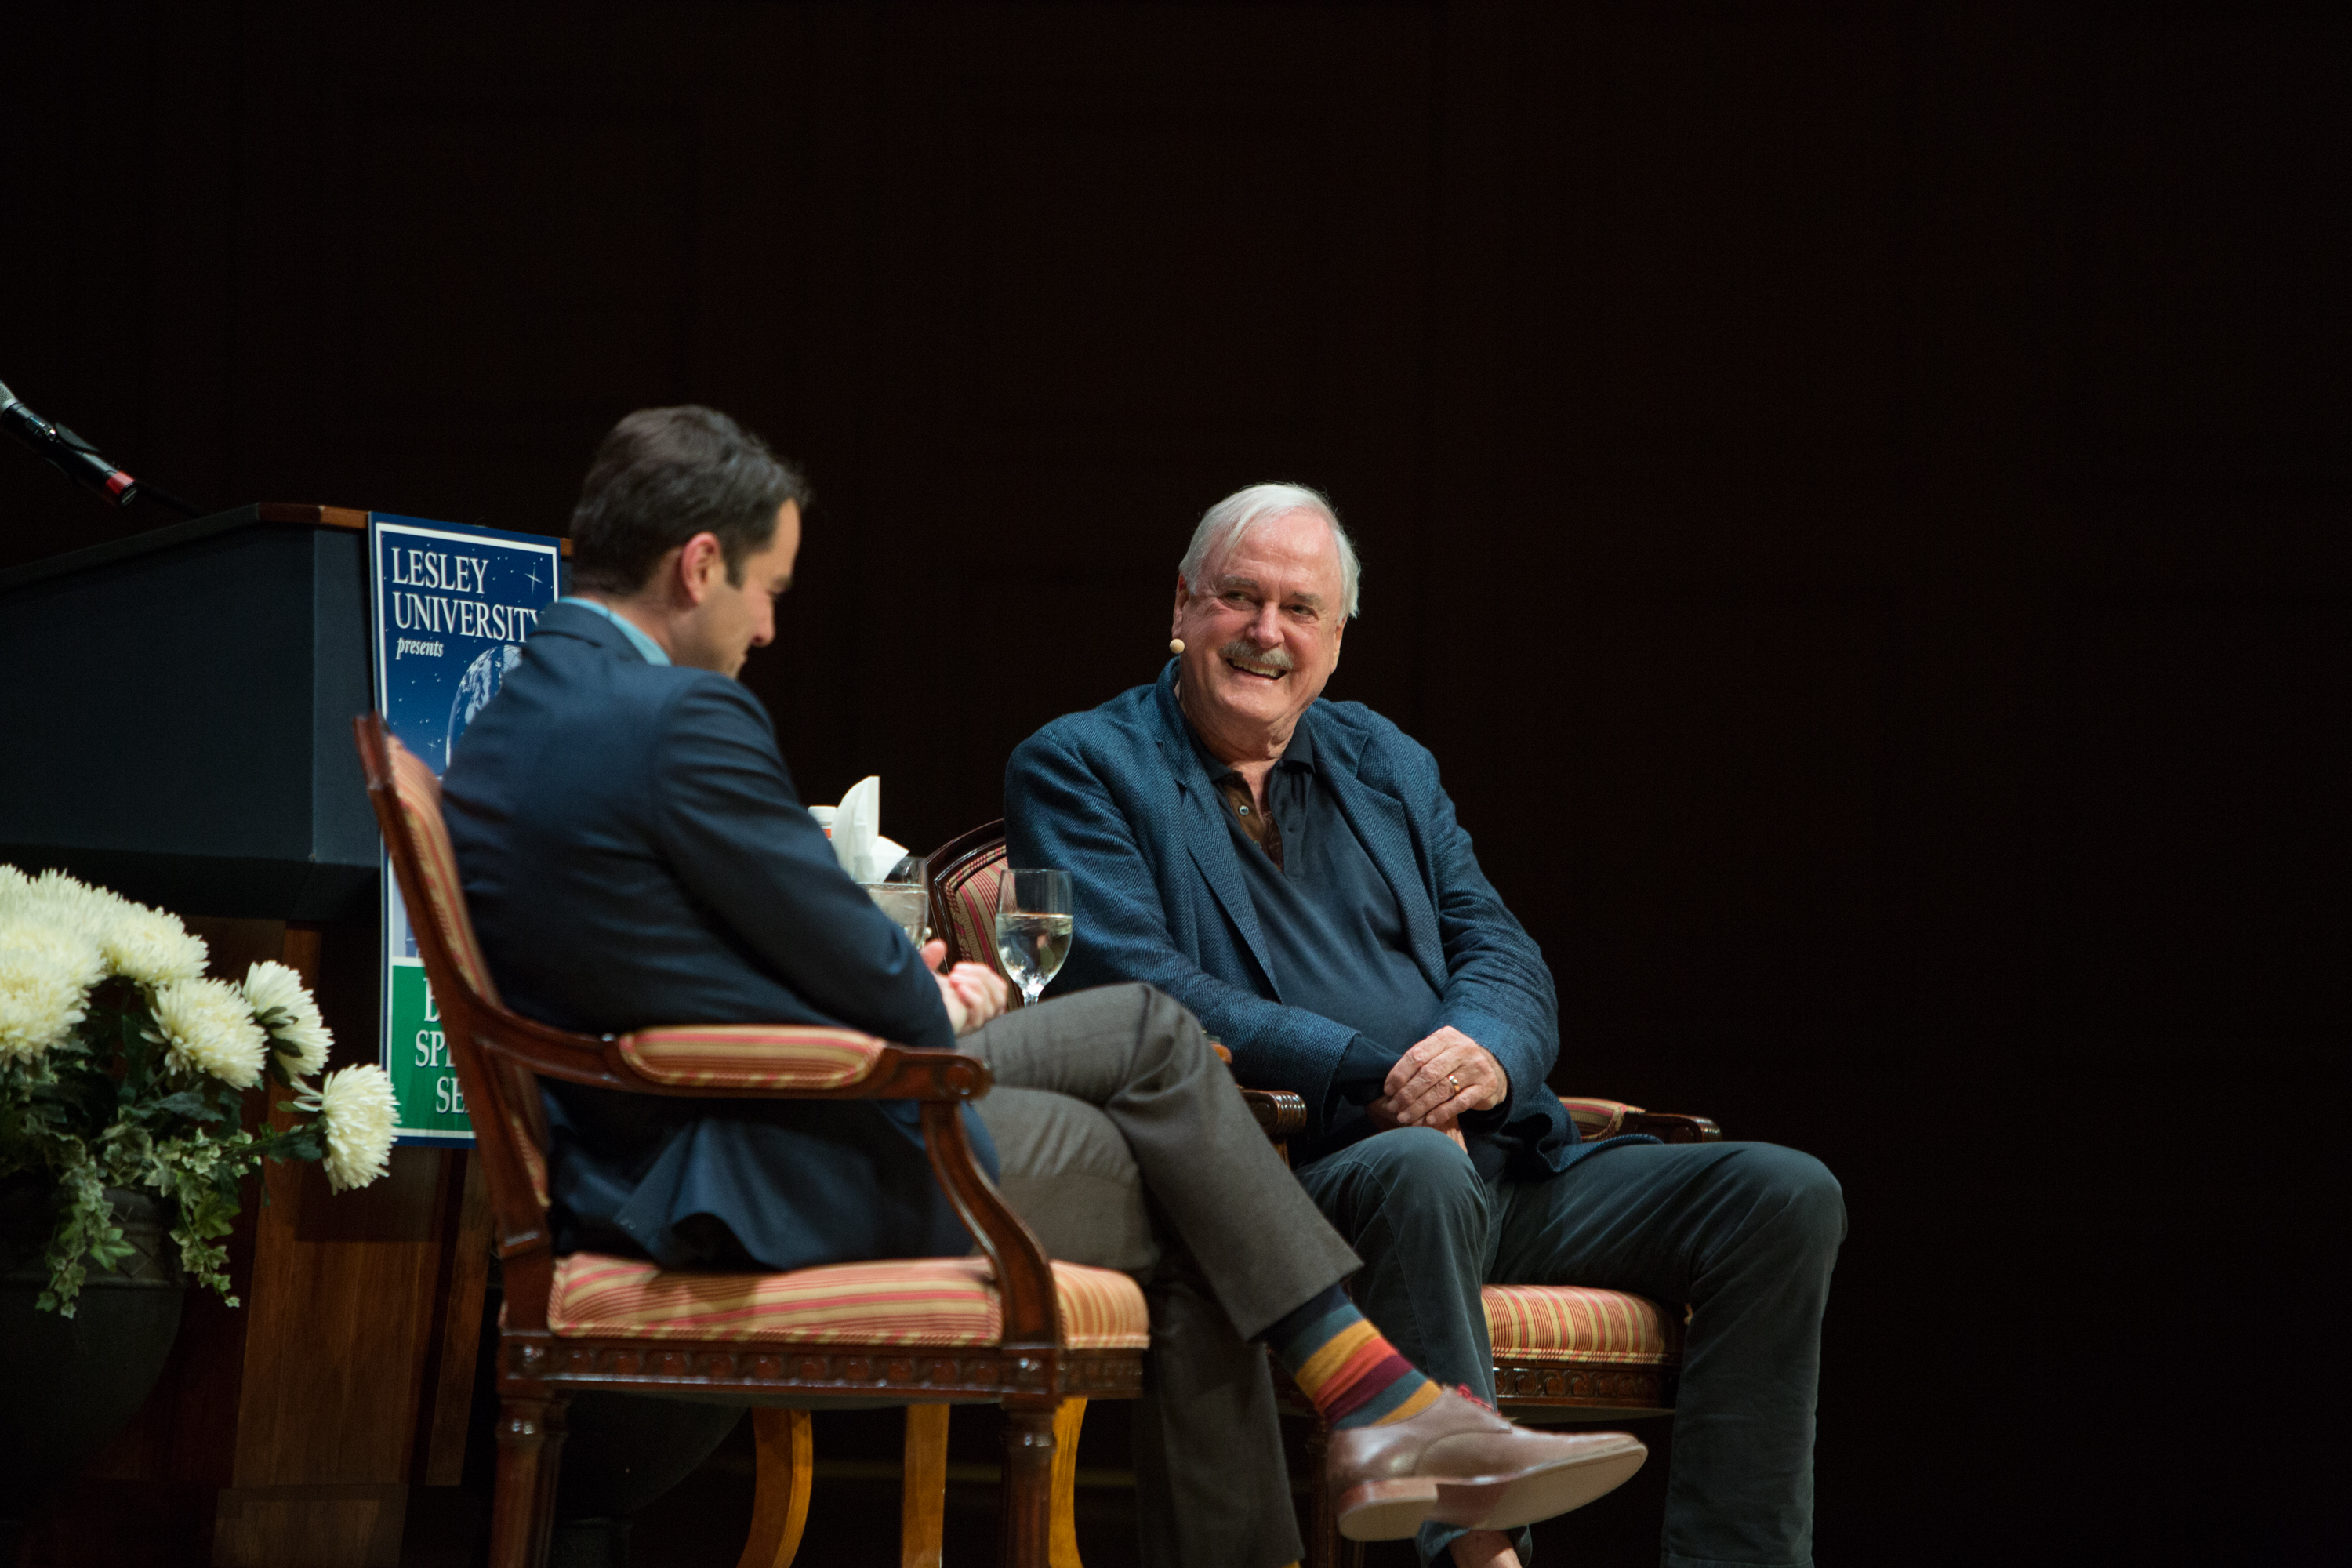 British comedy legend John Cleese joshes with WGBH's Jared Bowen.